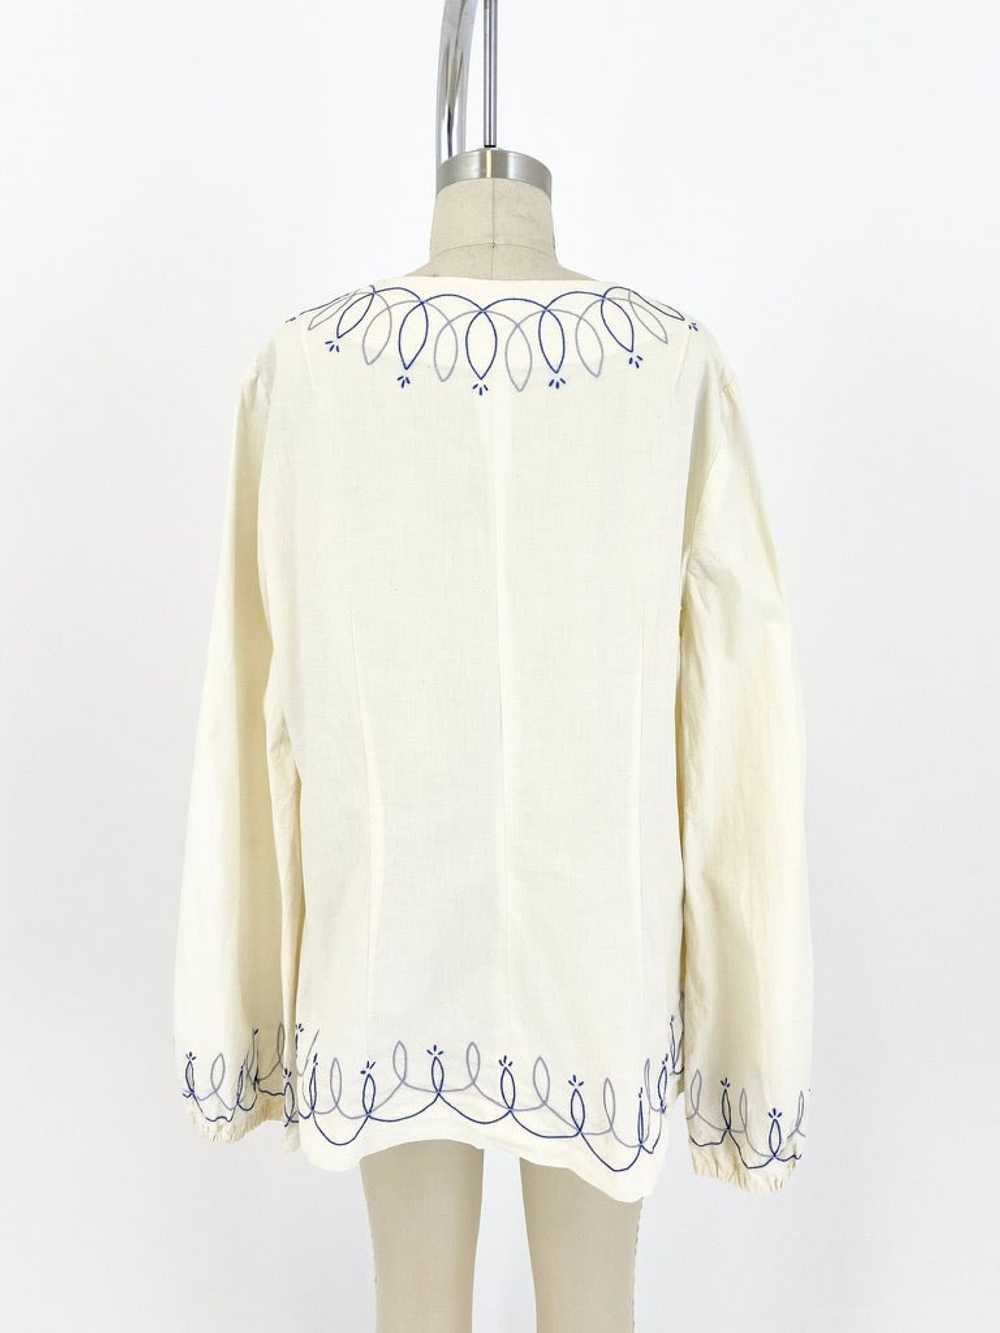 70s Embroidered Top - image 4